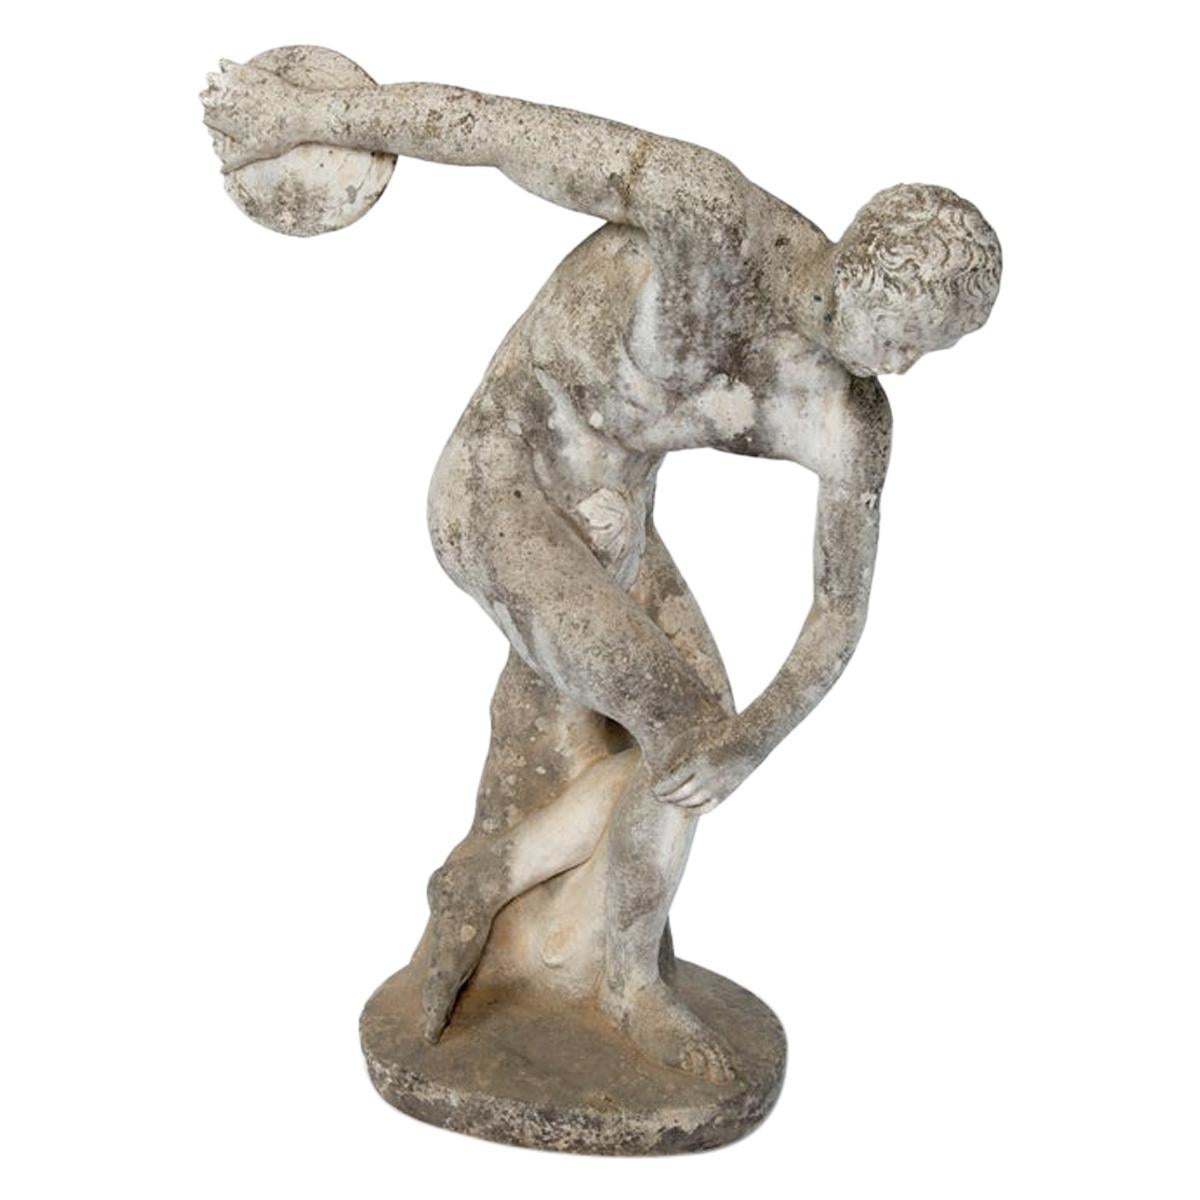 Small Cement Statue of a Discus Thrower, Discobolus